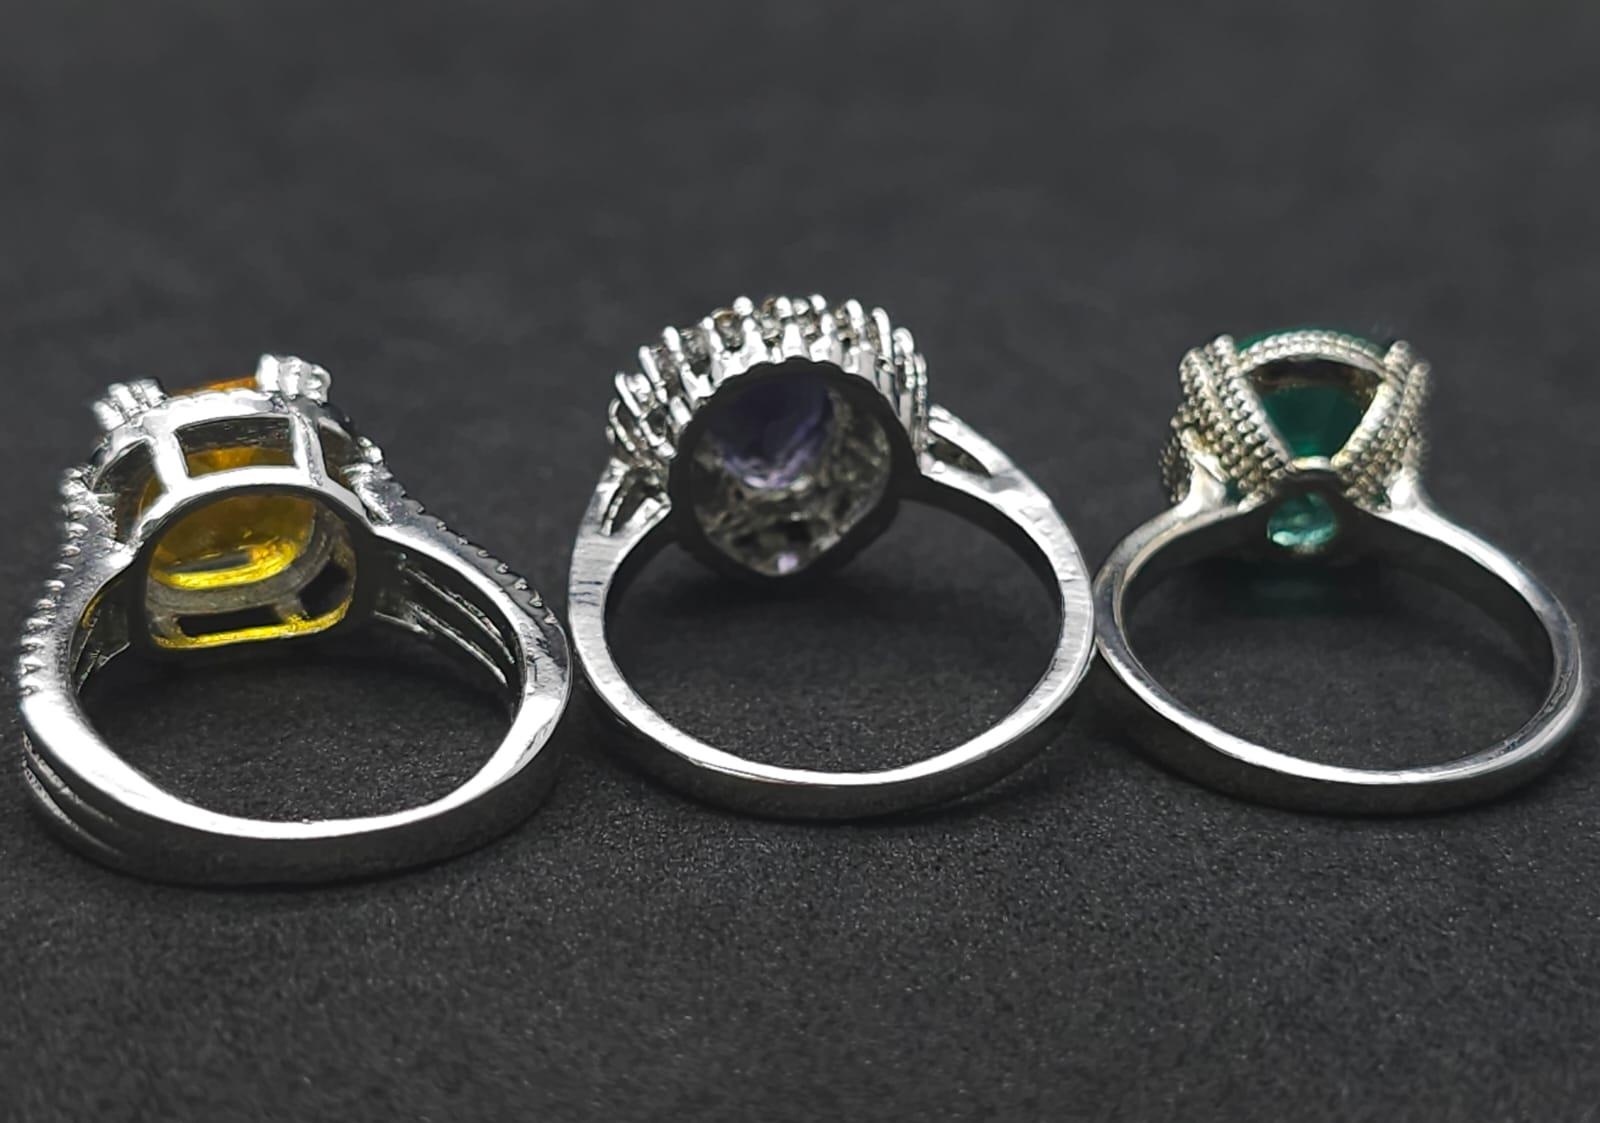 Six dress rings with a variety of gems presented in a miniature chez lounge. Very glamorous! - Image 9 of 12